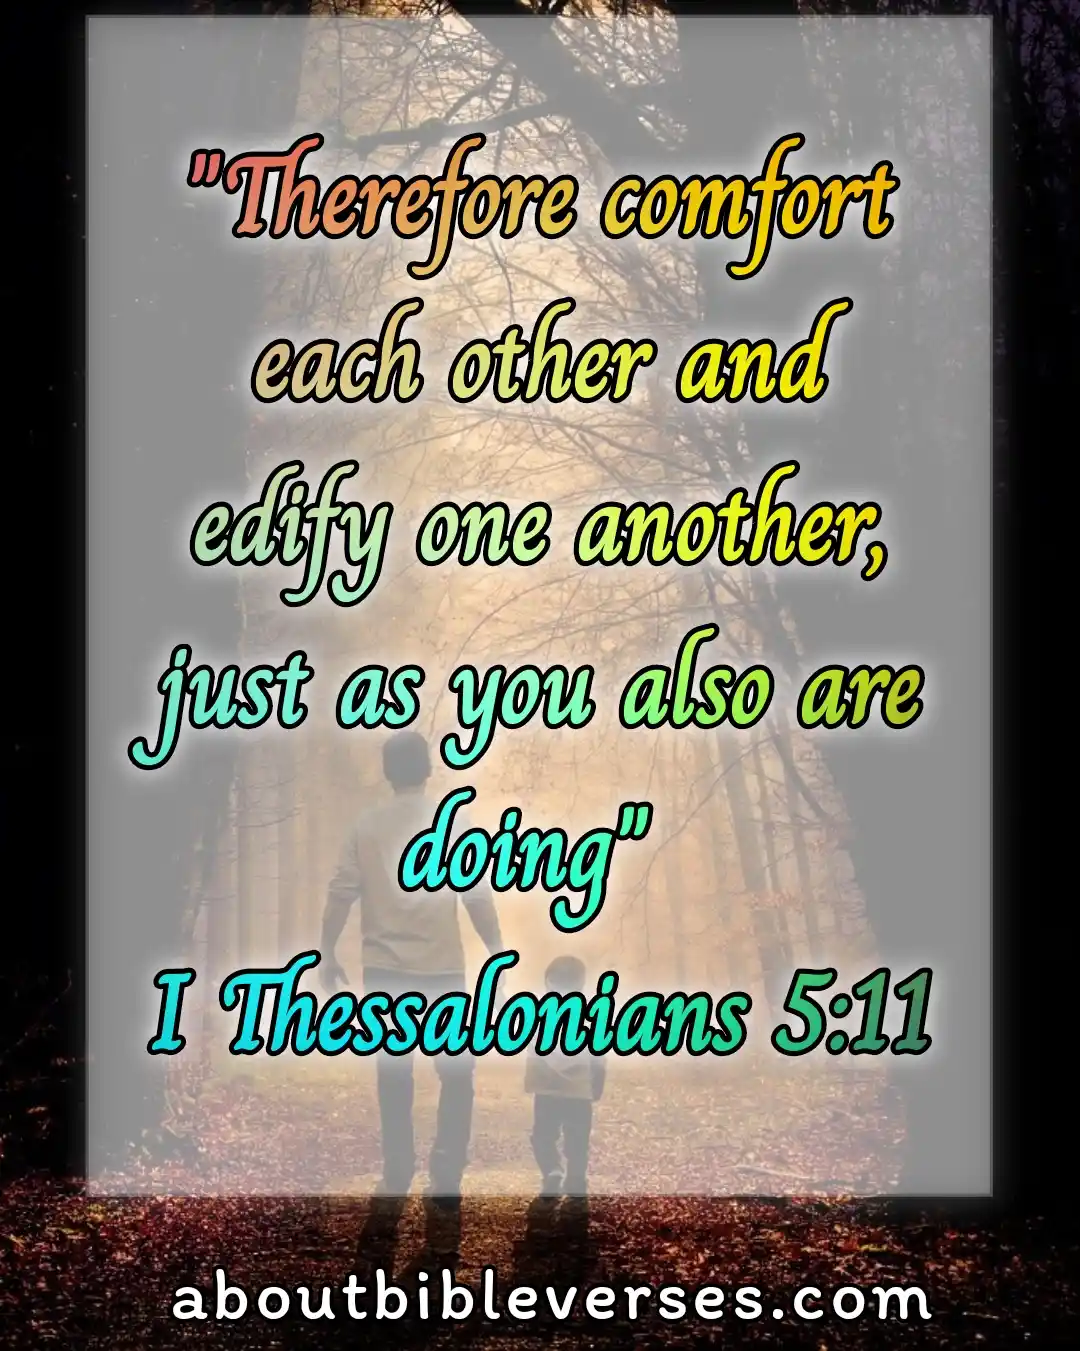 Bible Verses Communicating With Each Other (1 Thessalonians 5:11)